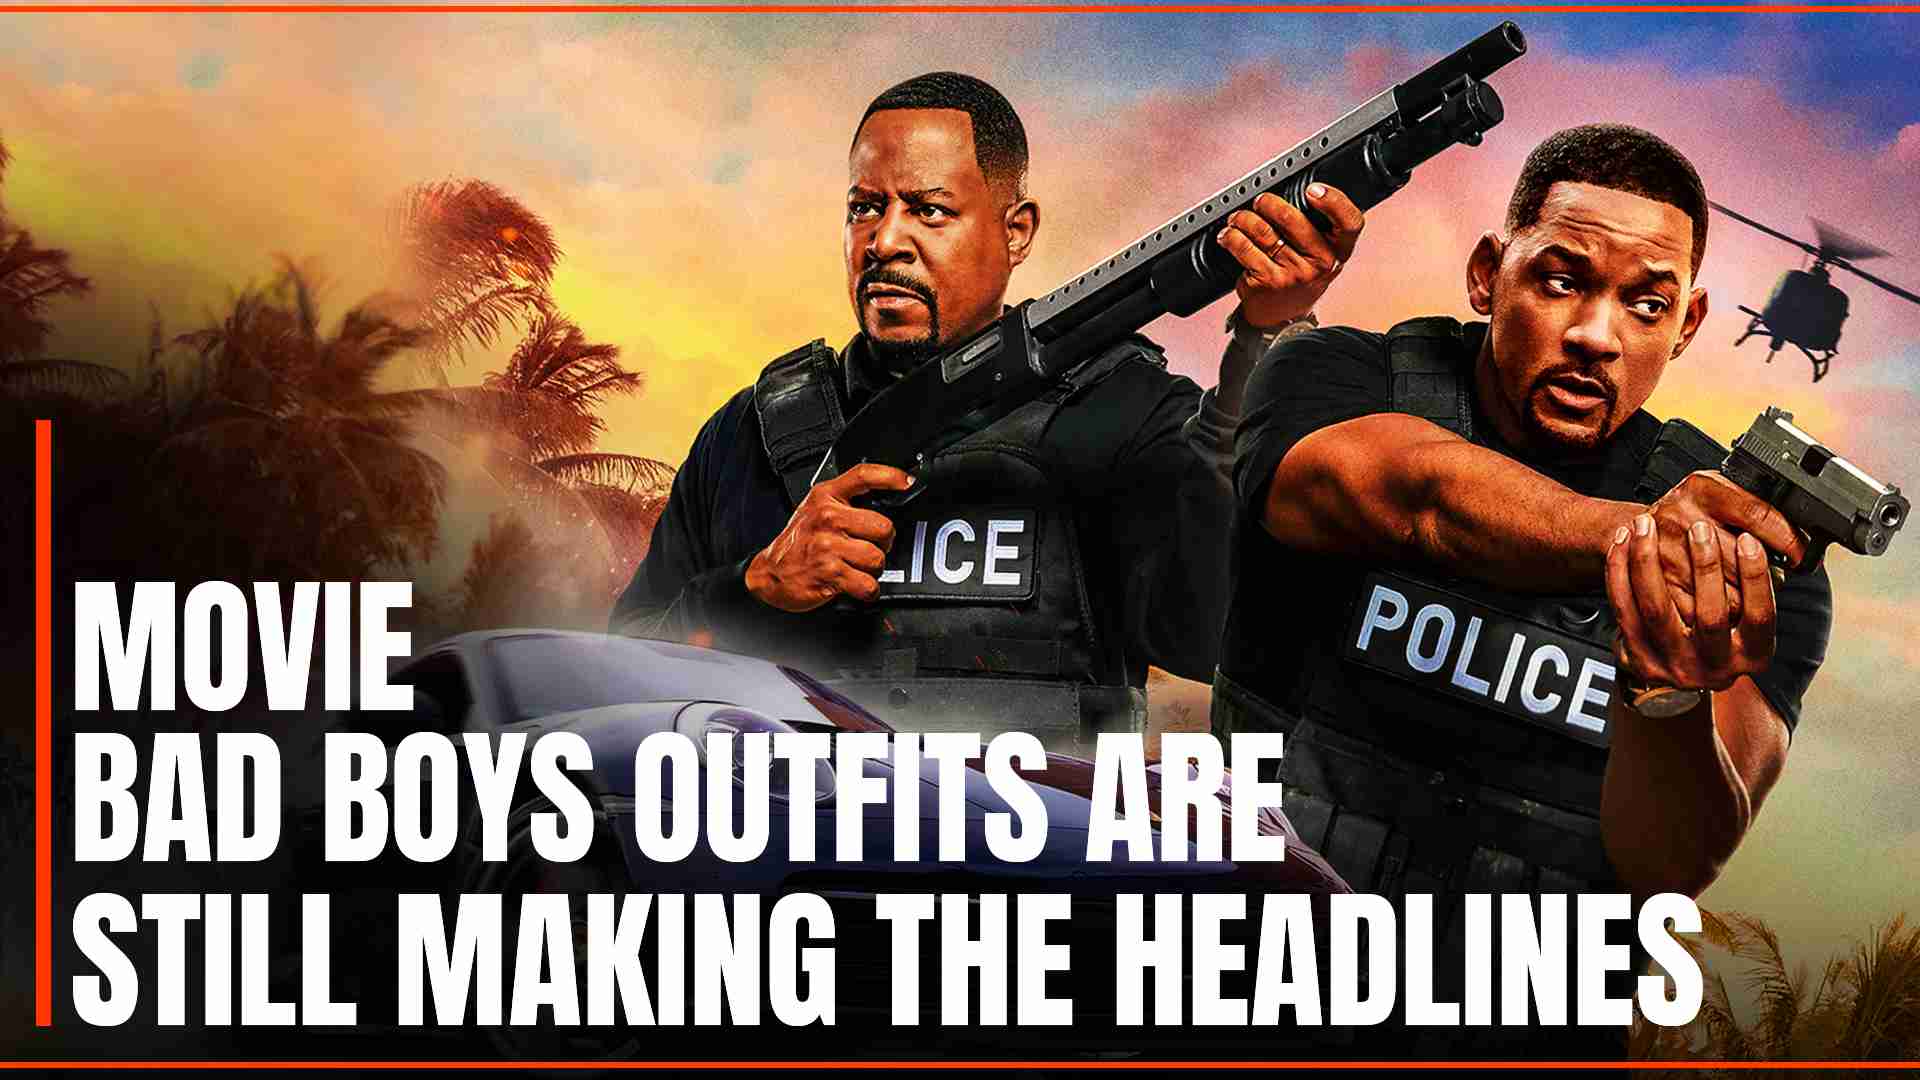 Movie Bad Boys Outfits Are Still Making The Headlines